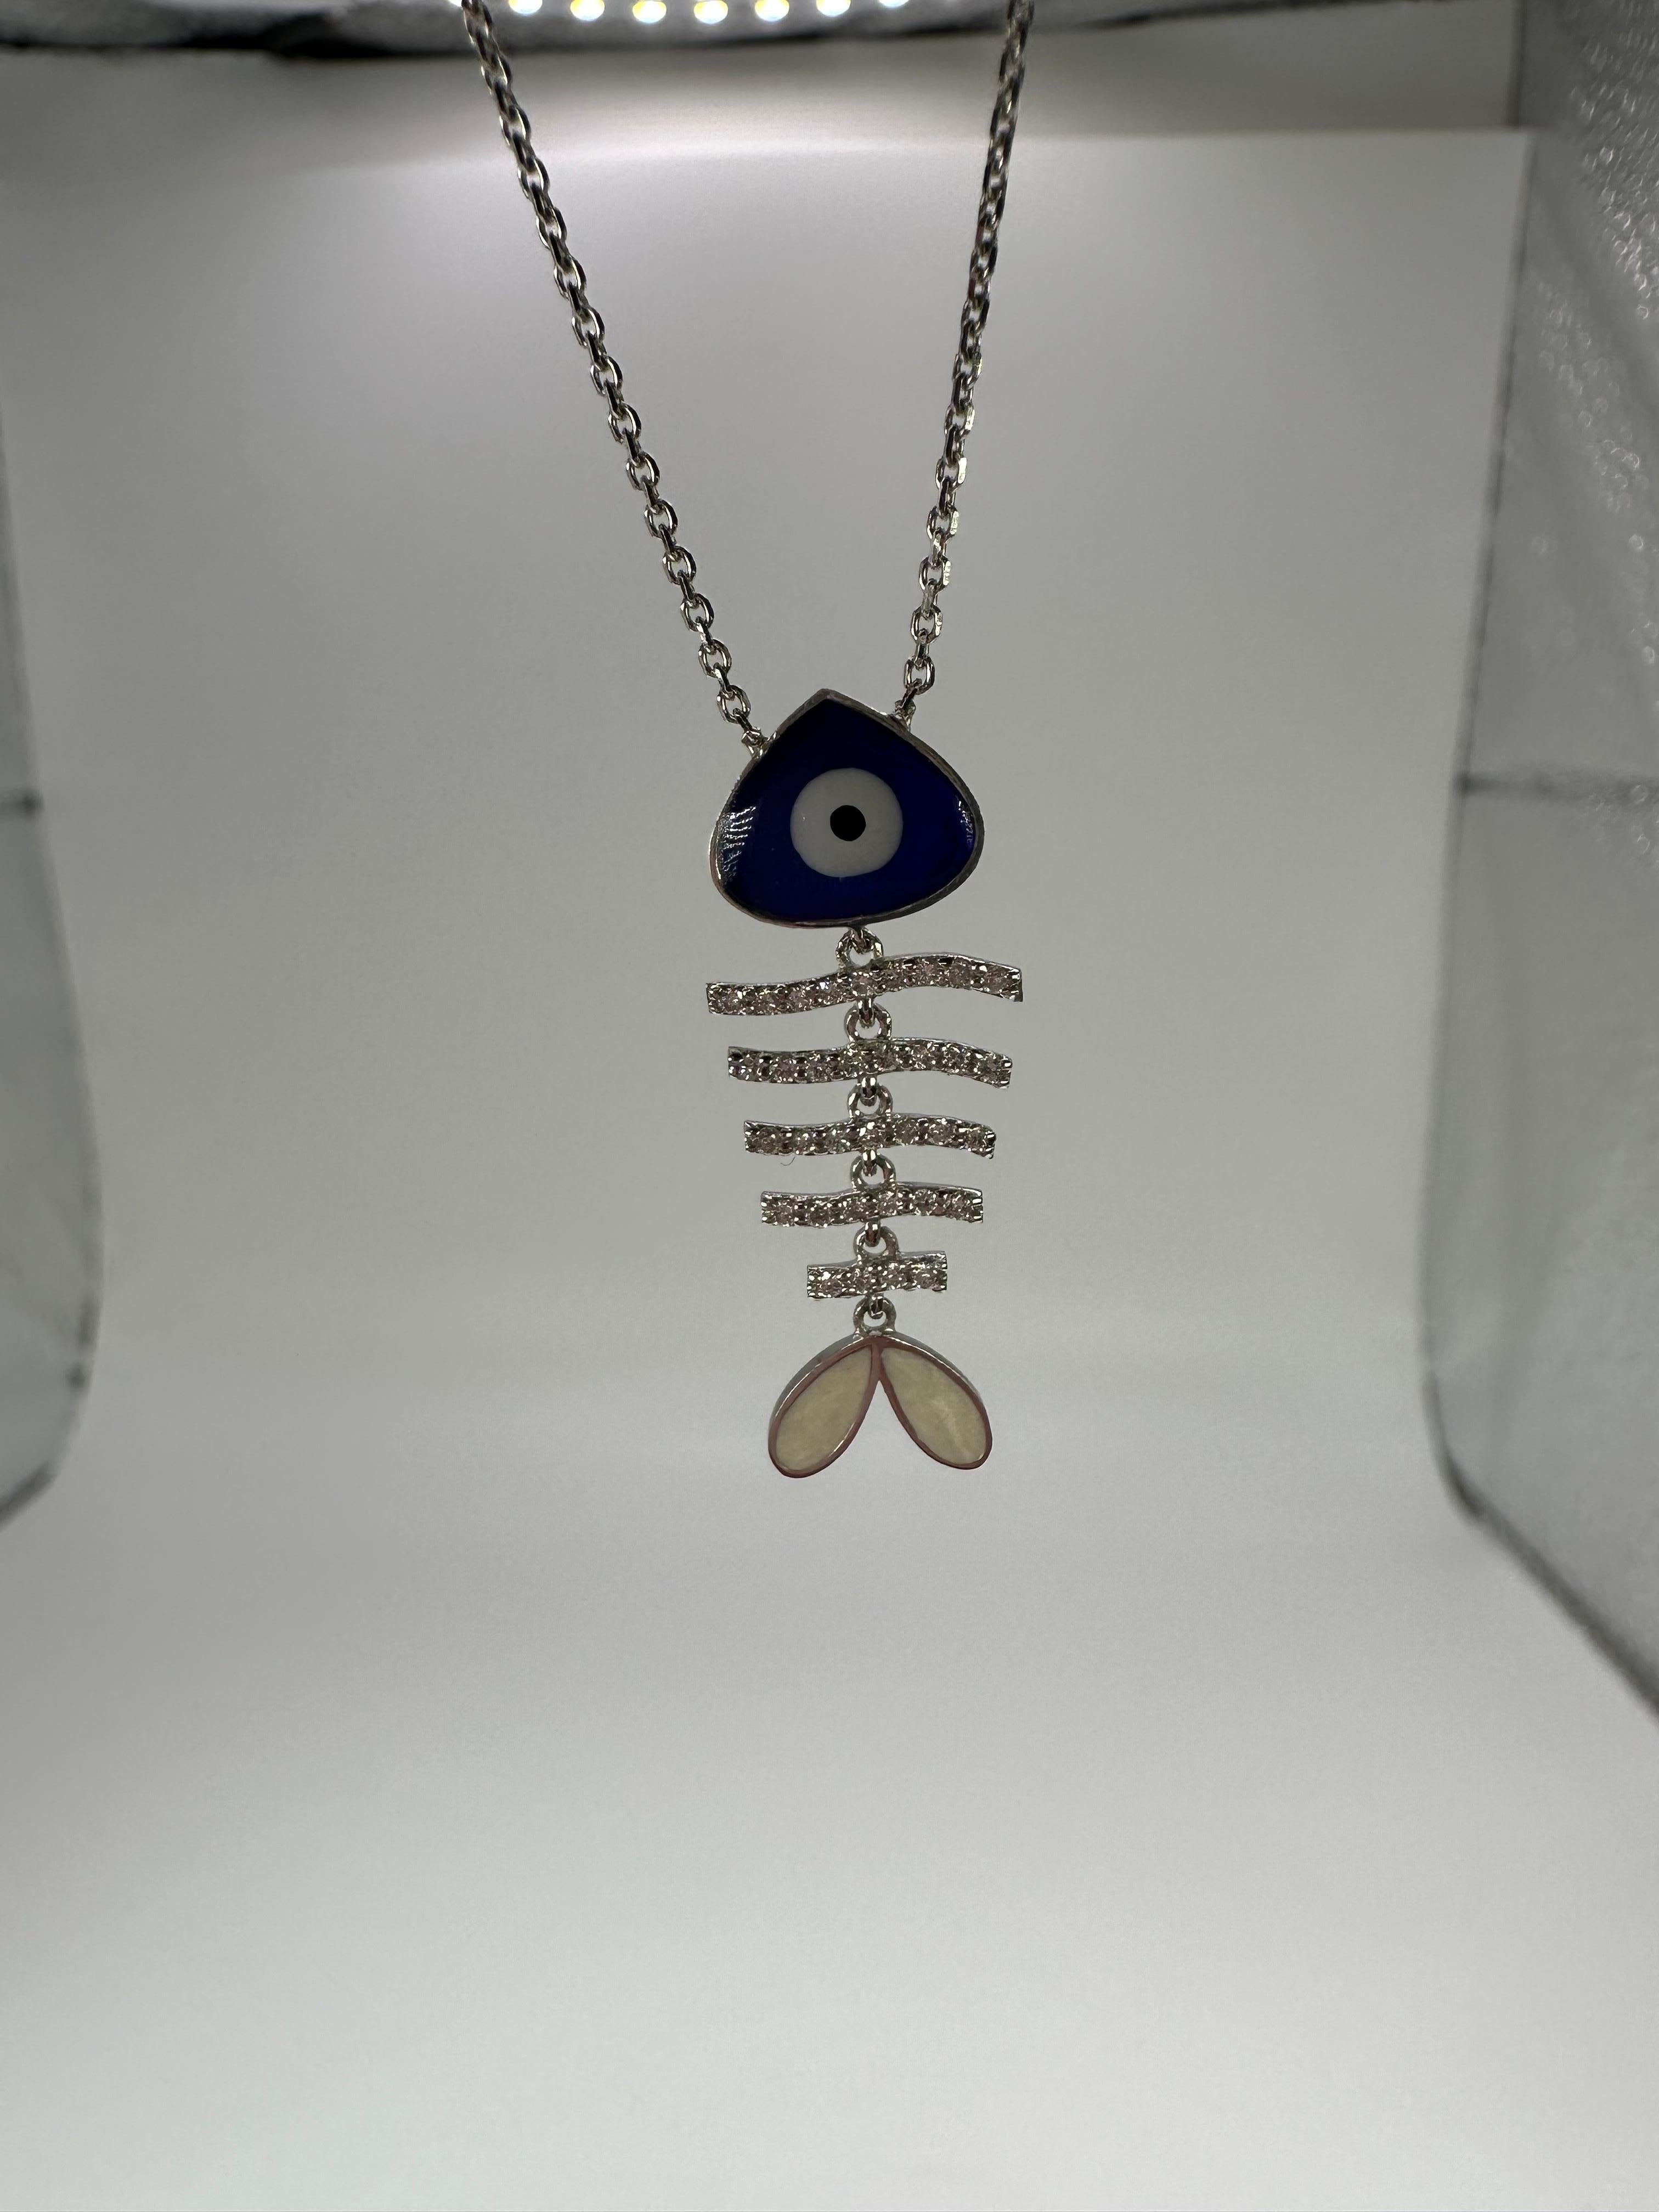 Modern fish bone pendant necklace with evil eye, sparkles like crazy made with gold, diamonds and fine glass and enamel. This piece is definitly one of a kind!

GOLD: 18KT gold
NATURAL DIAMOND(S)
Clarity/Color: VS/G
Carat:0.17ct
Grams:3.40
Item#: